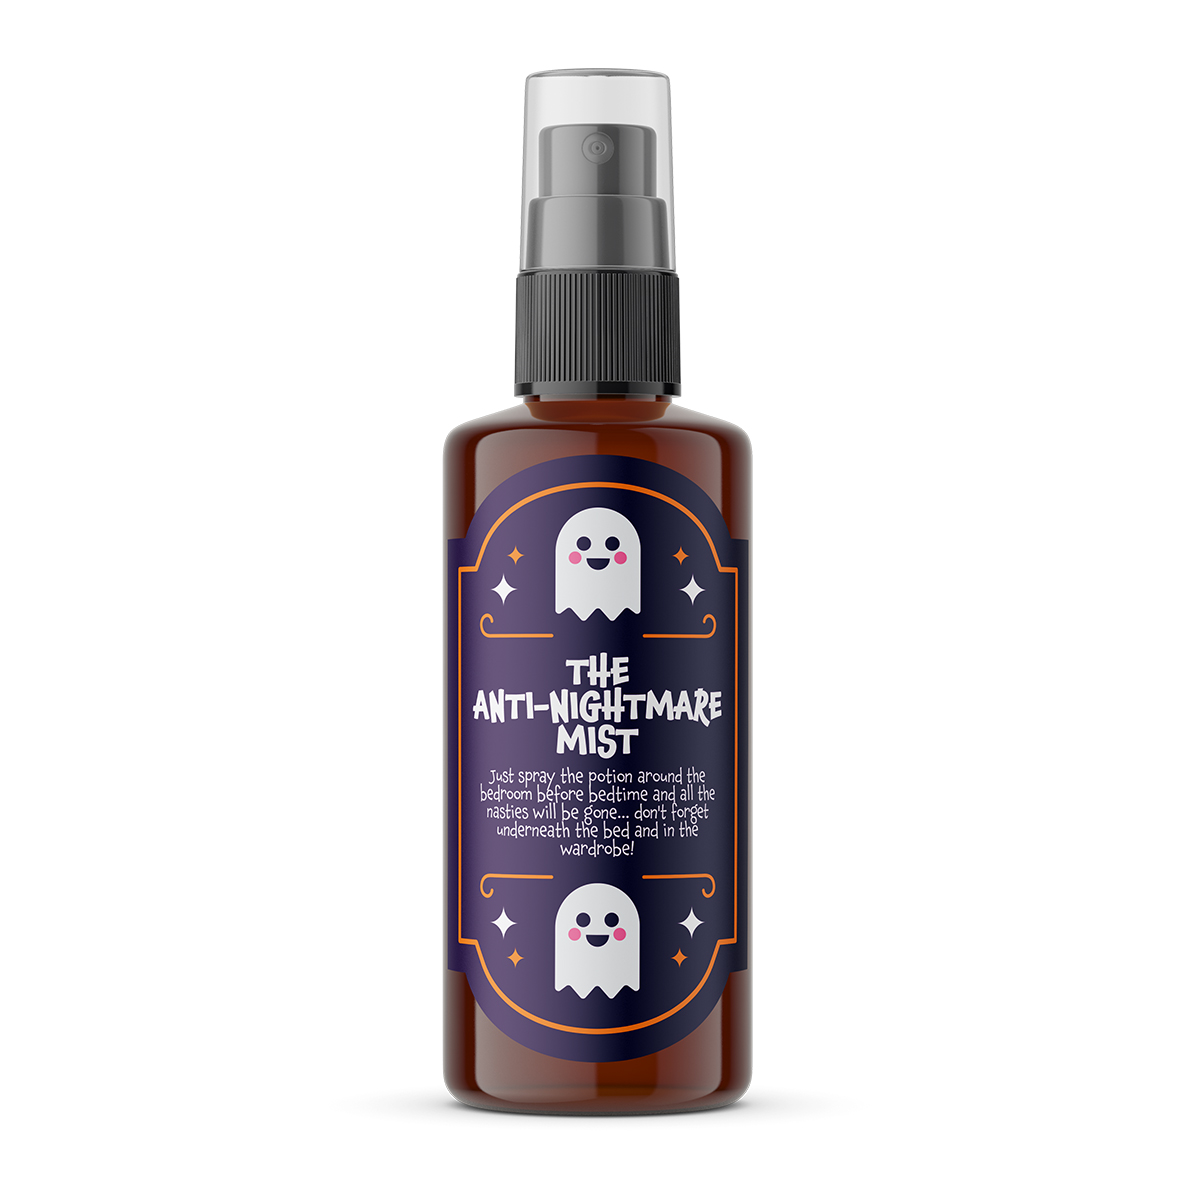 The Anti Nightmare Mist will help prevent your child from having bad dreams